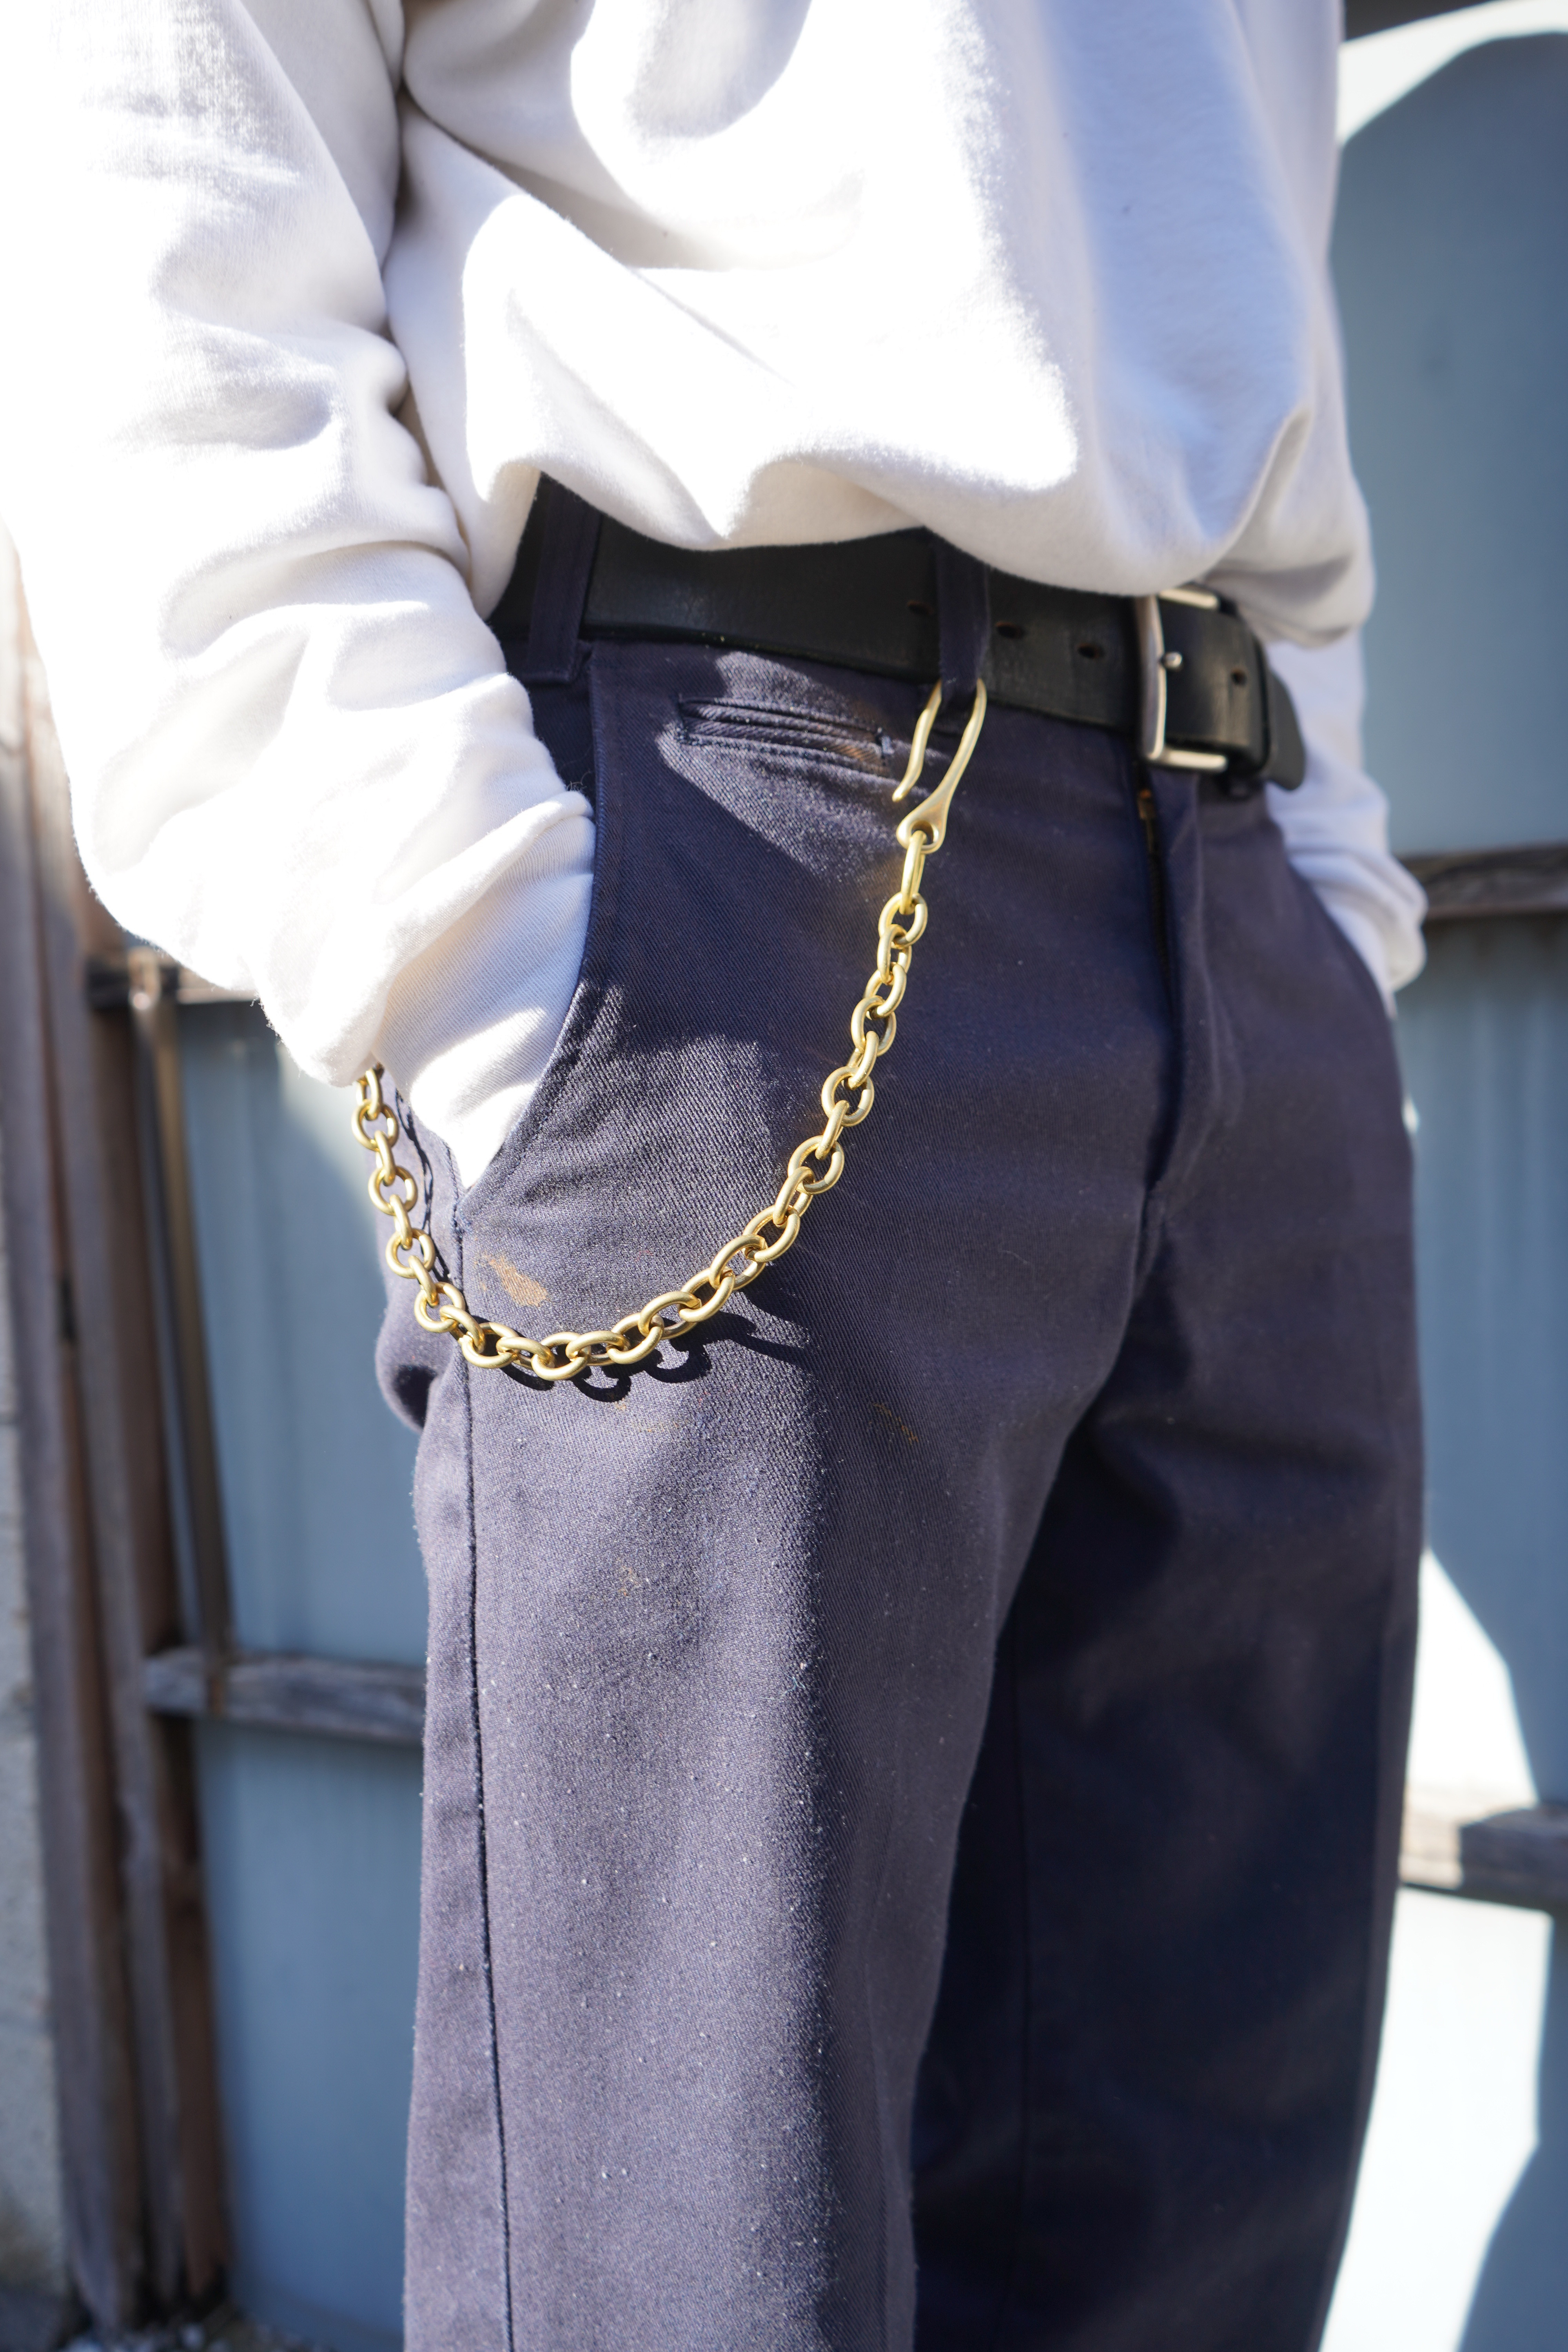 Ryoku 真鍮 wallet chain